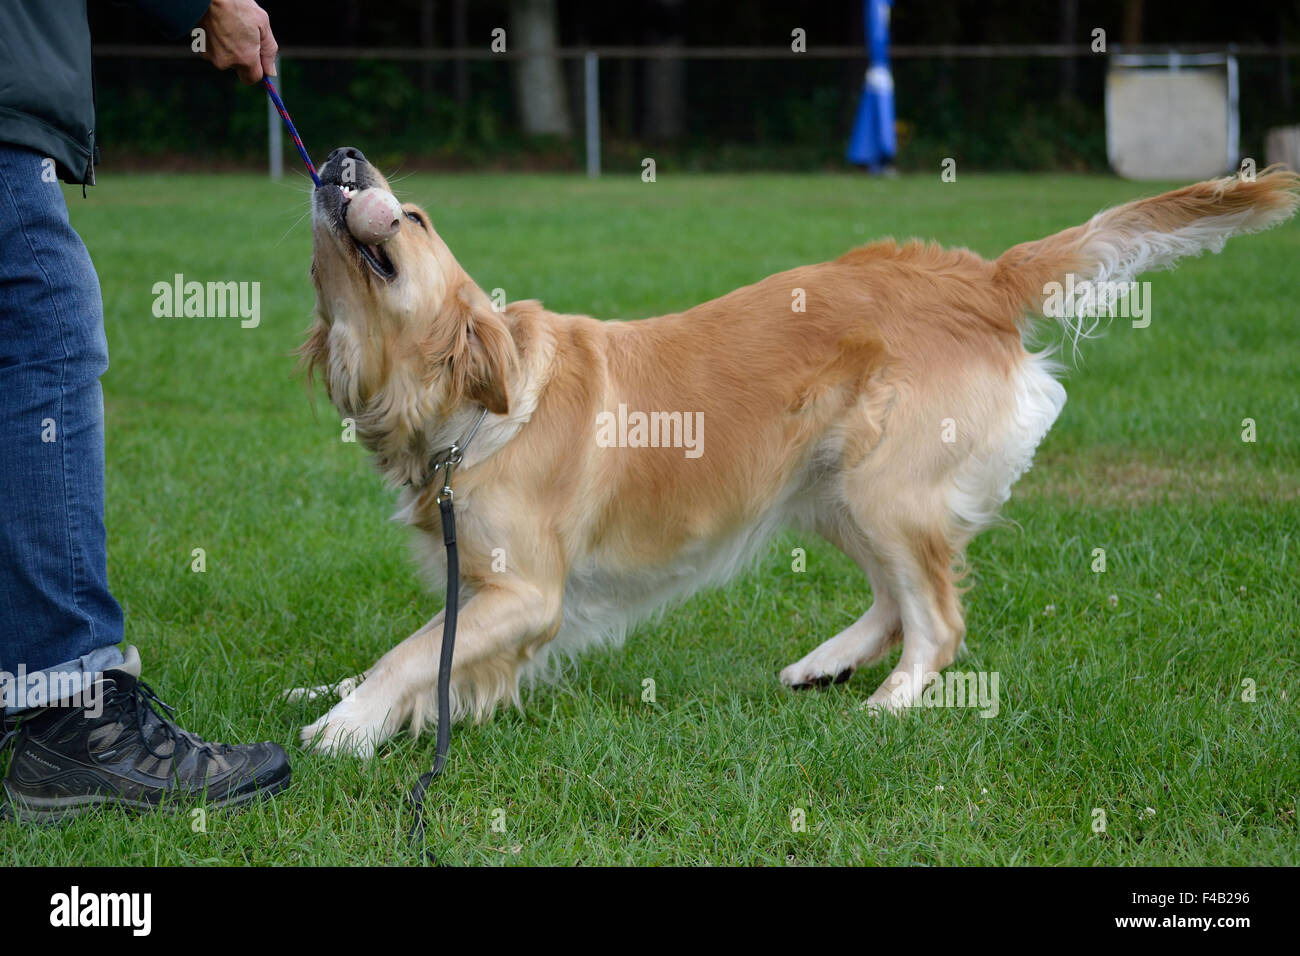 Big Dog Playing with ball Banque D'Images